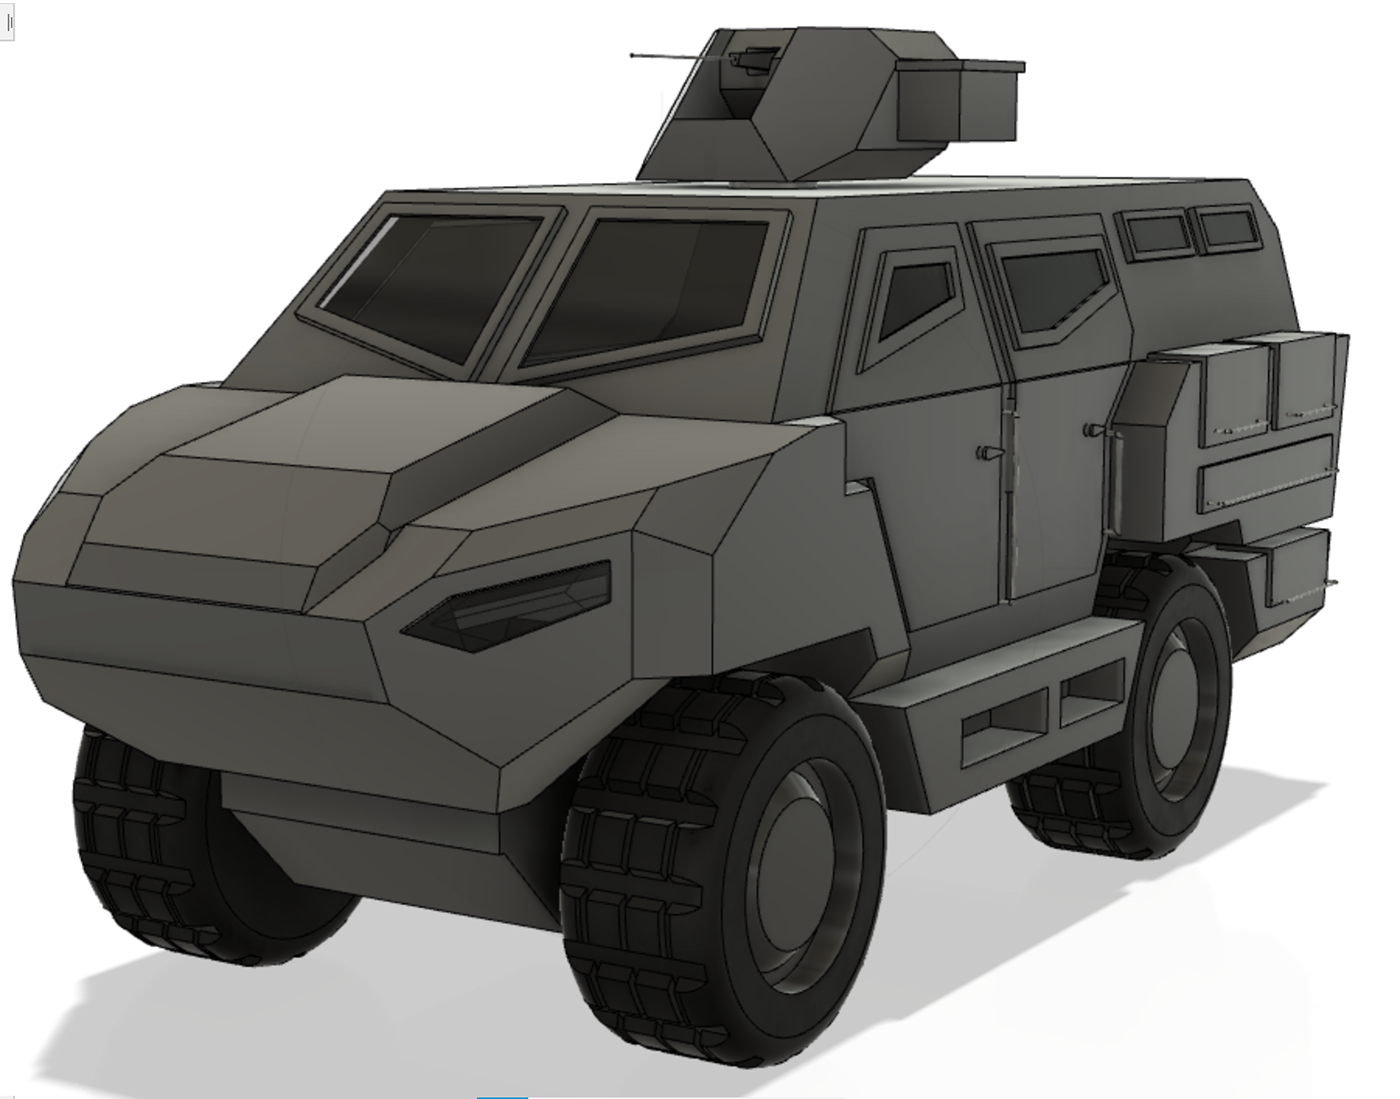 armored vehicle armored vehicles army Military War 3d modeling cad fusion 360 3D Render